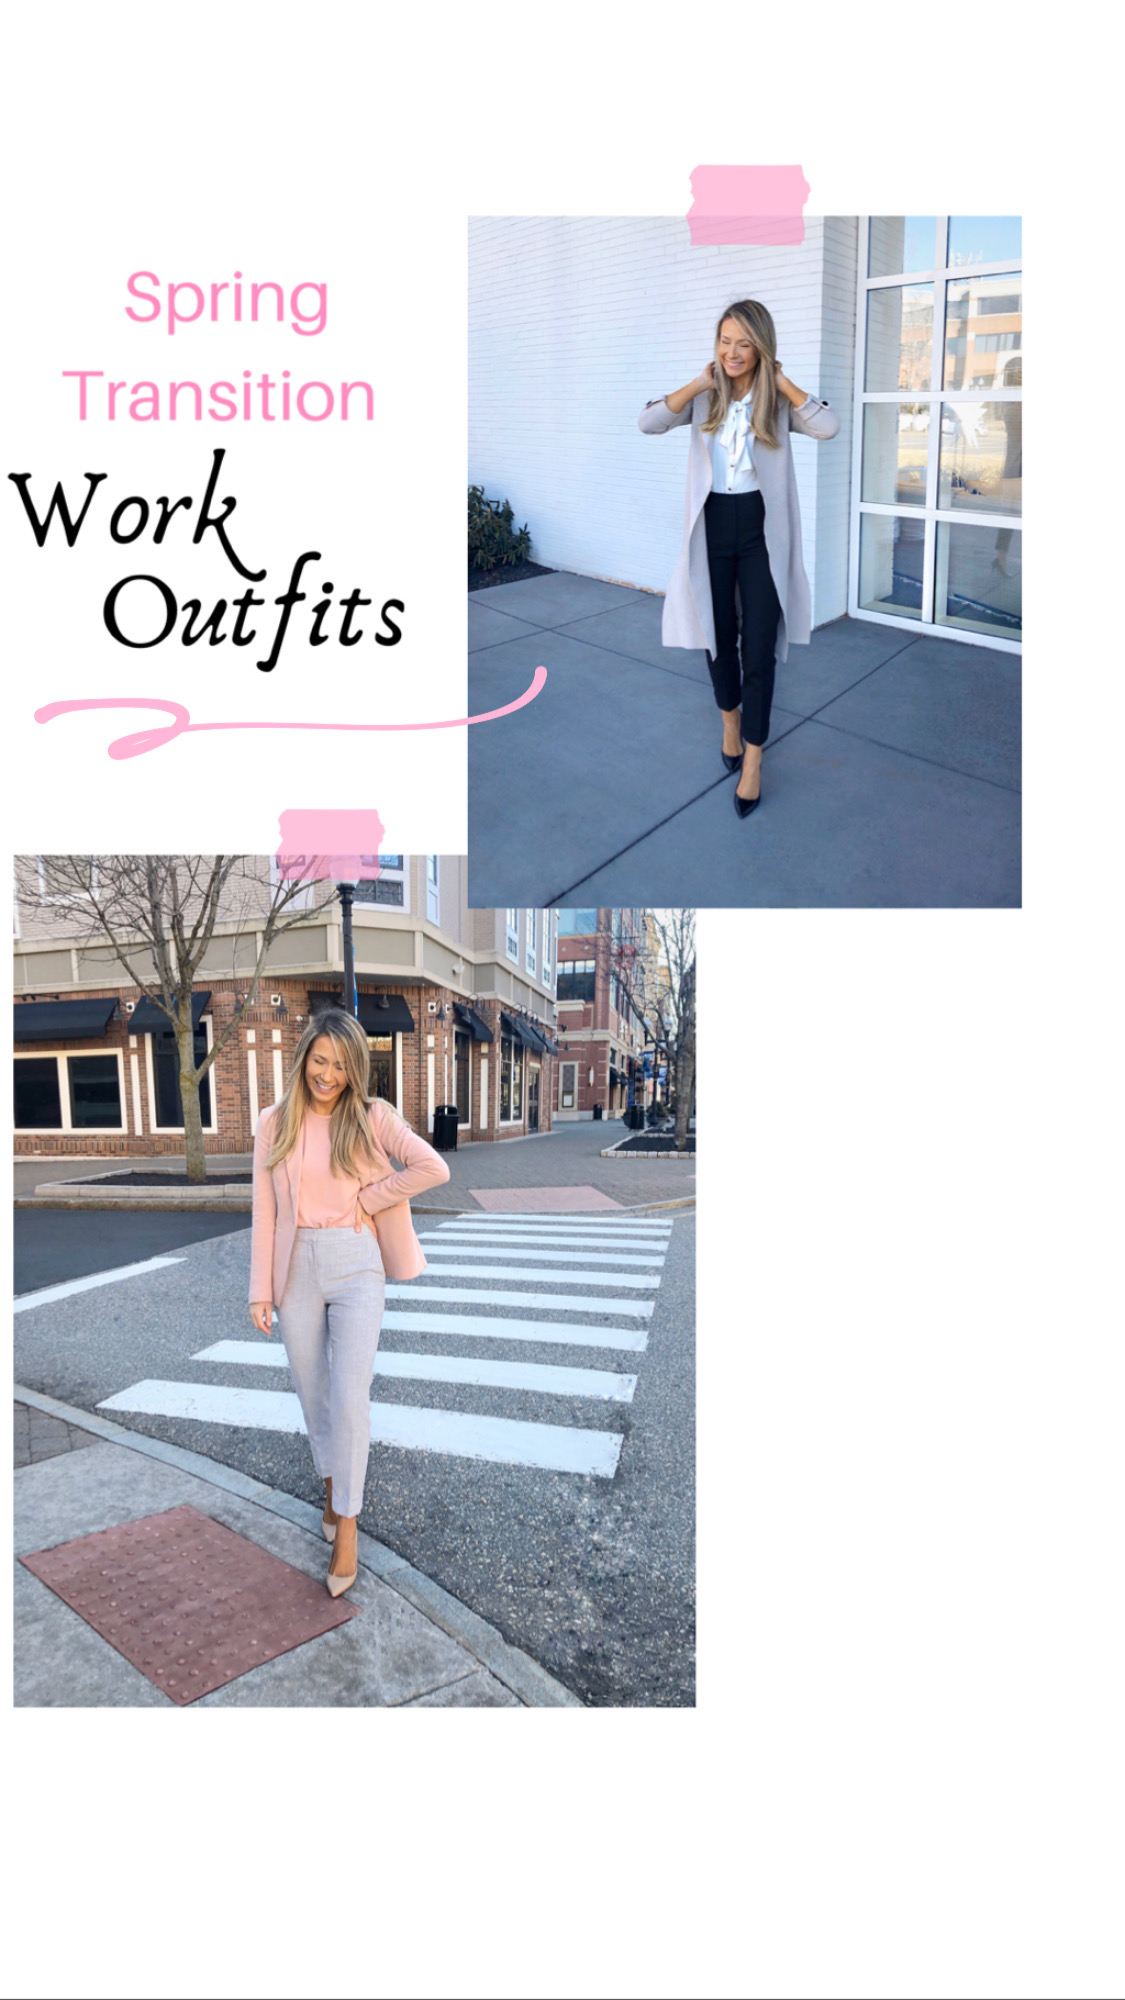 Spring Transition Work Outfits